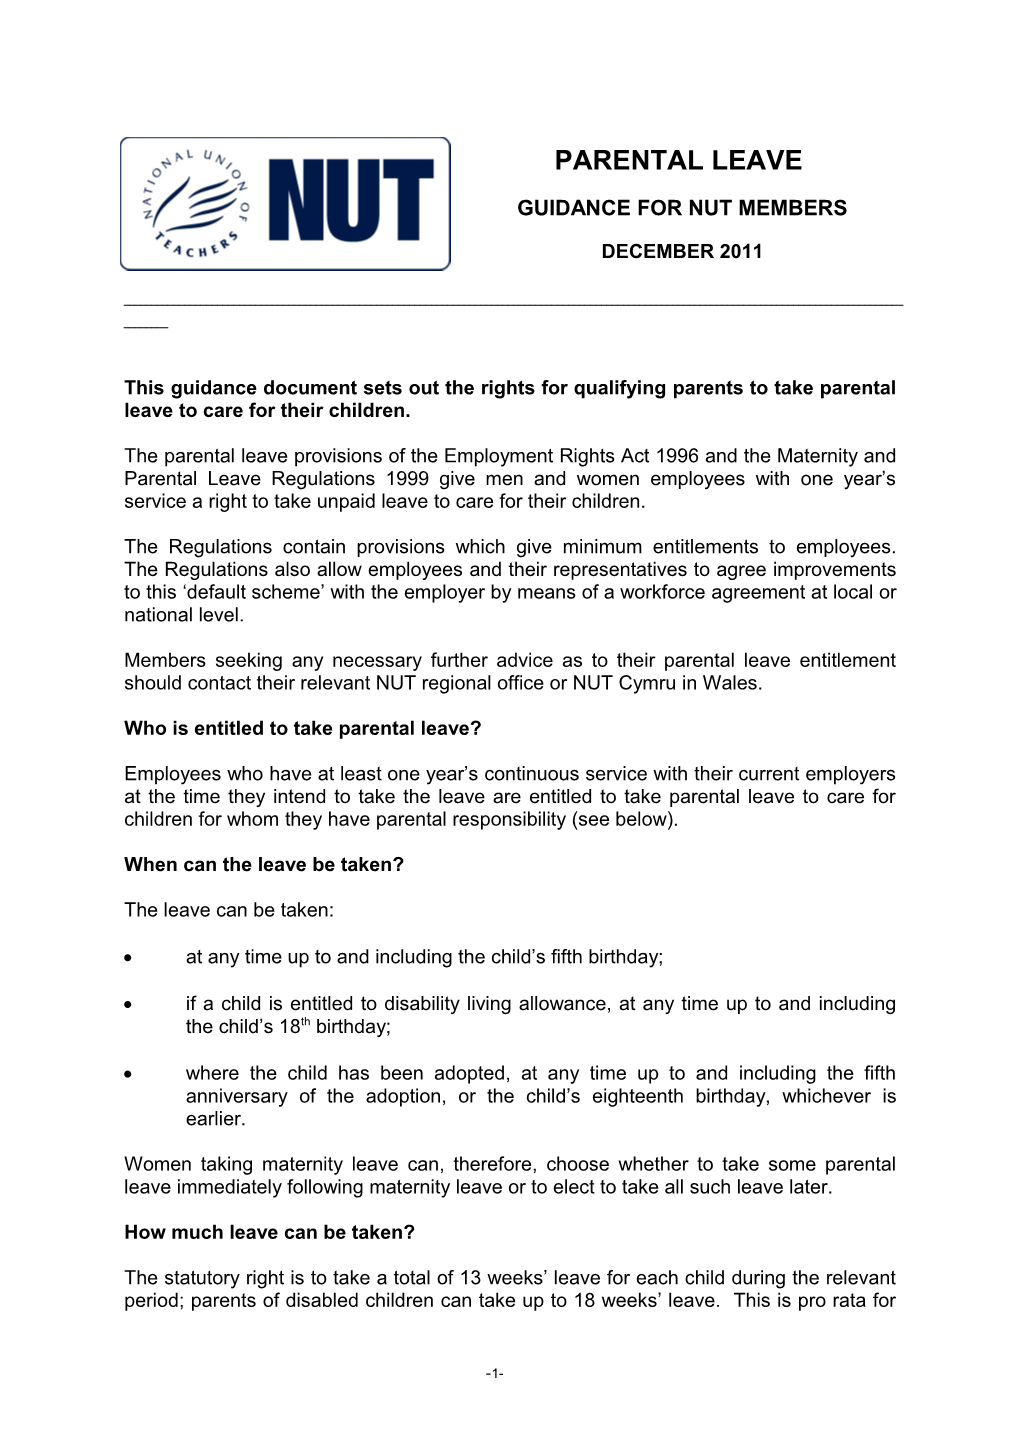 Guidance for Nut Members